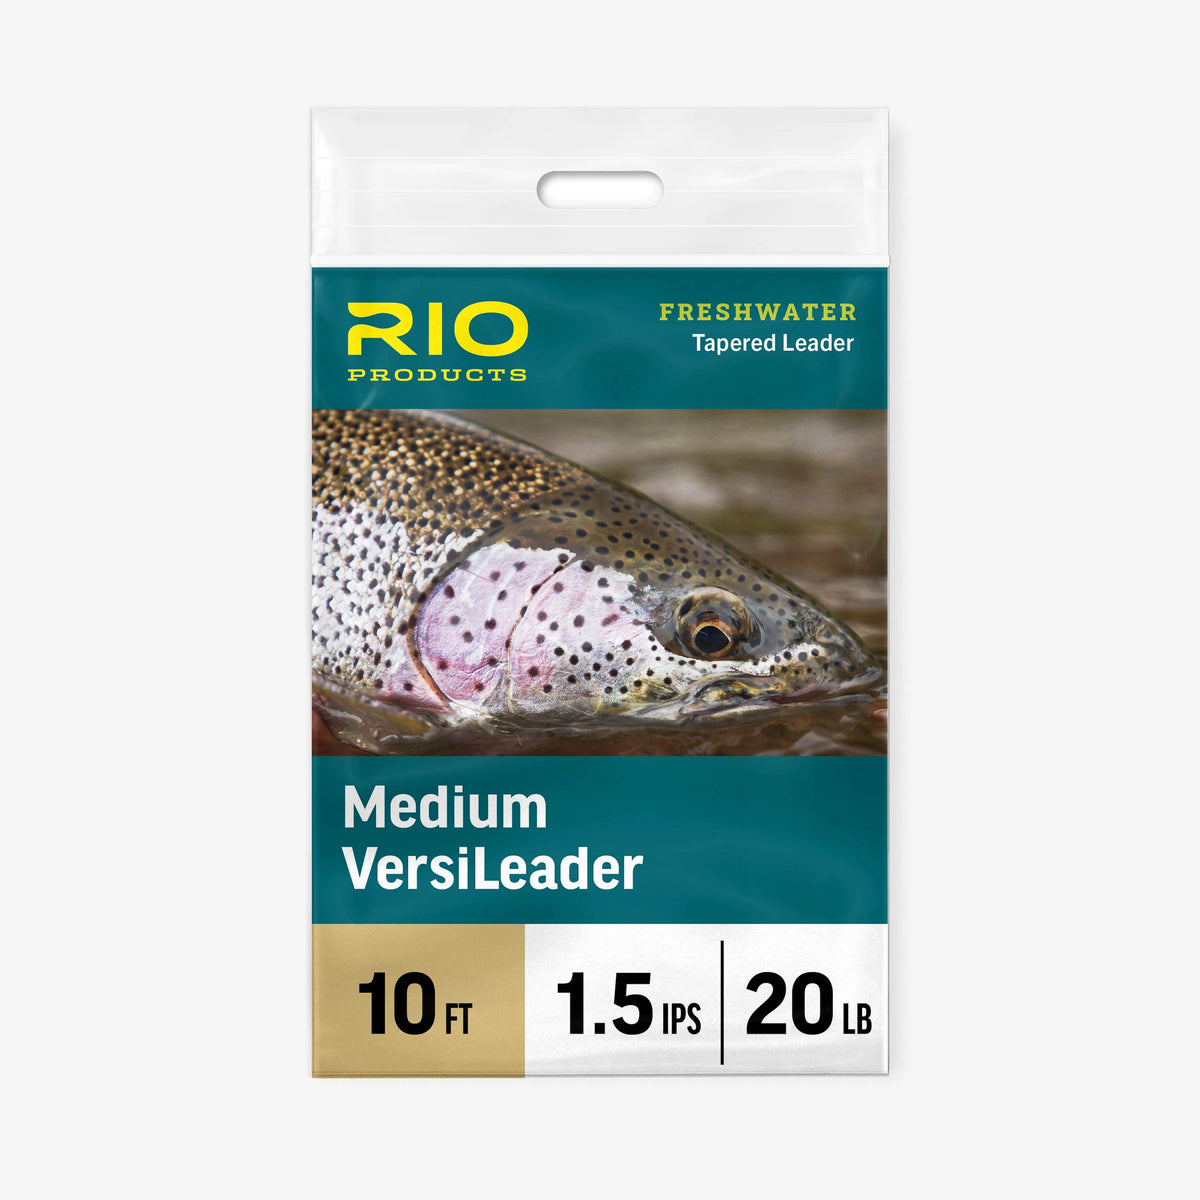 RIO Technical Trout Premier Floating Fly Line